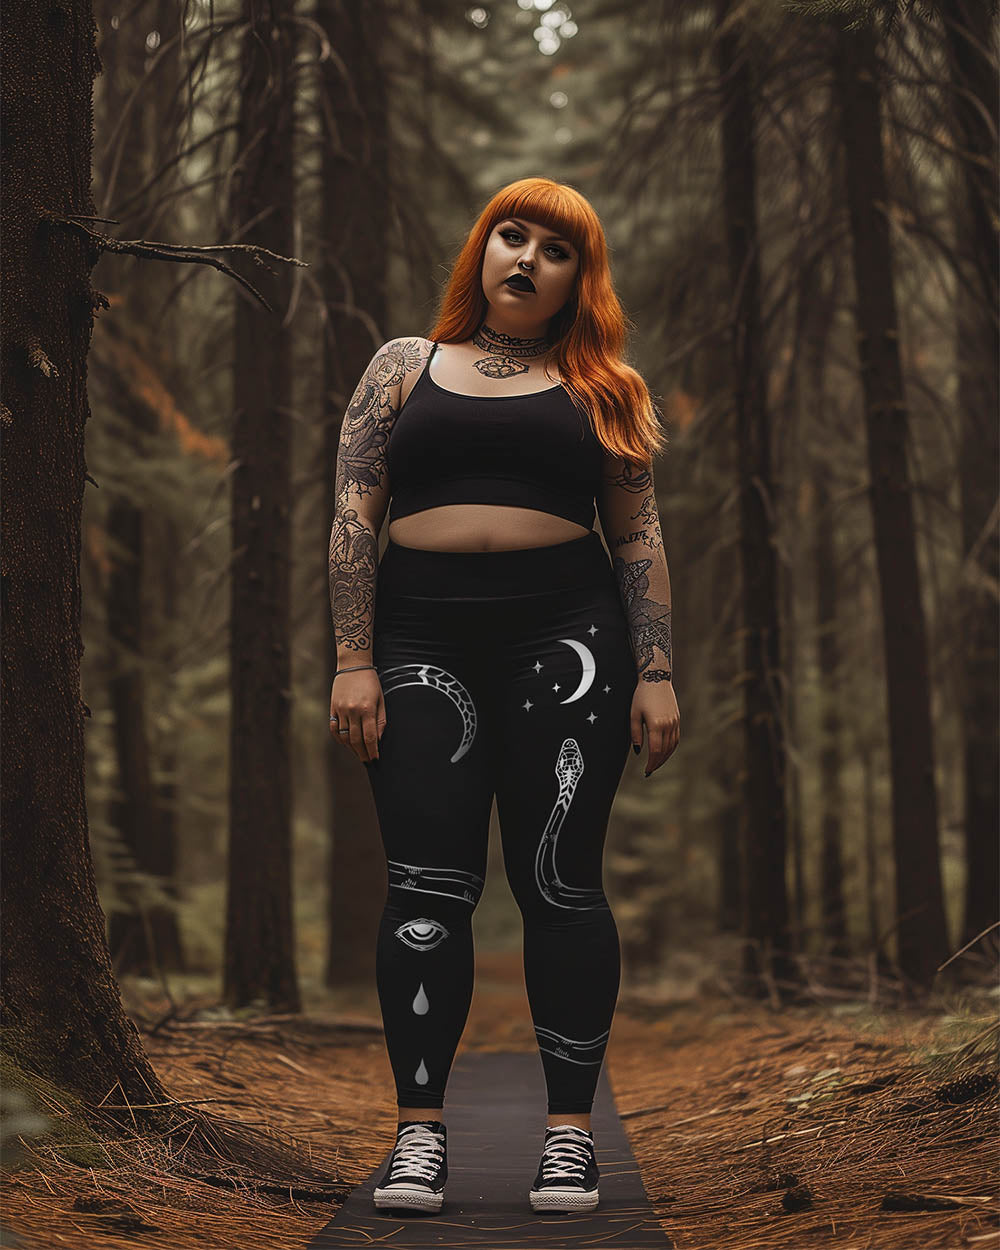 Serpent Summoner Plus Size Leggings - Vegan UPF 50+ Protection Activewear - Goth Yoga Leisurewear - Witchy Occult Pagan Style